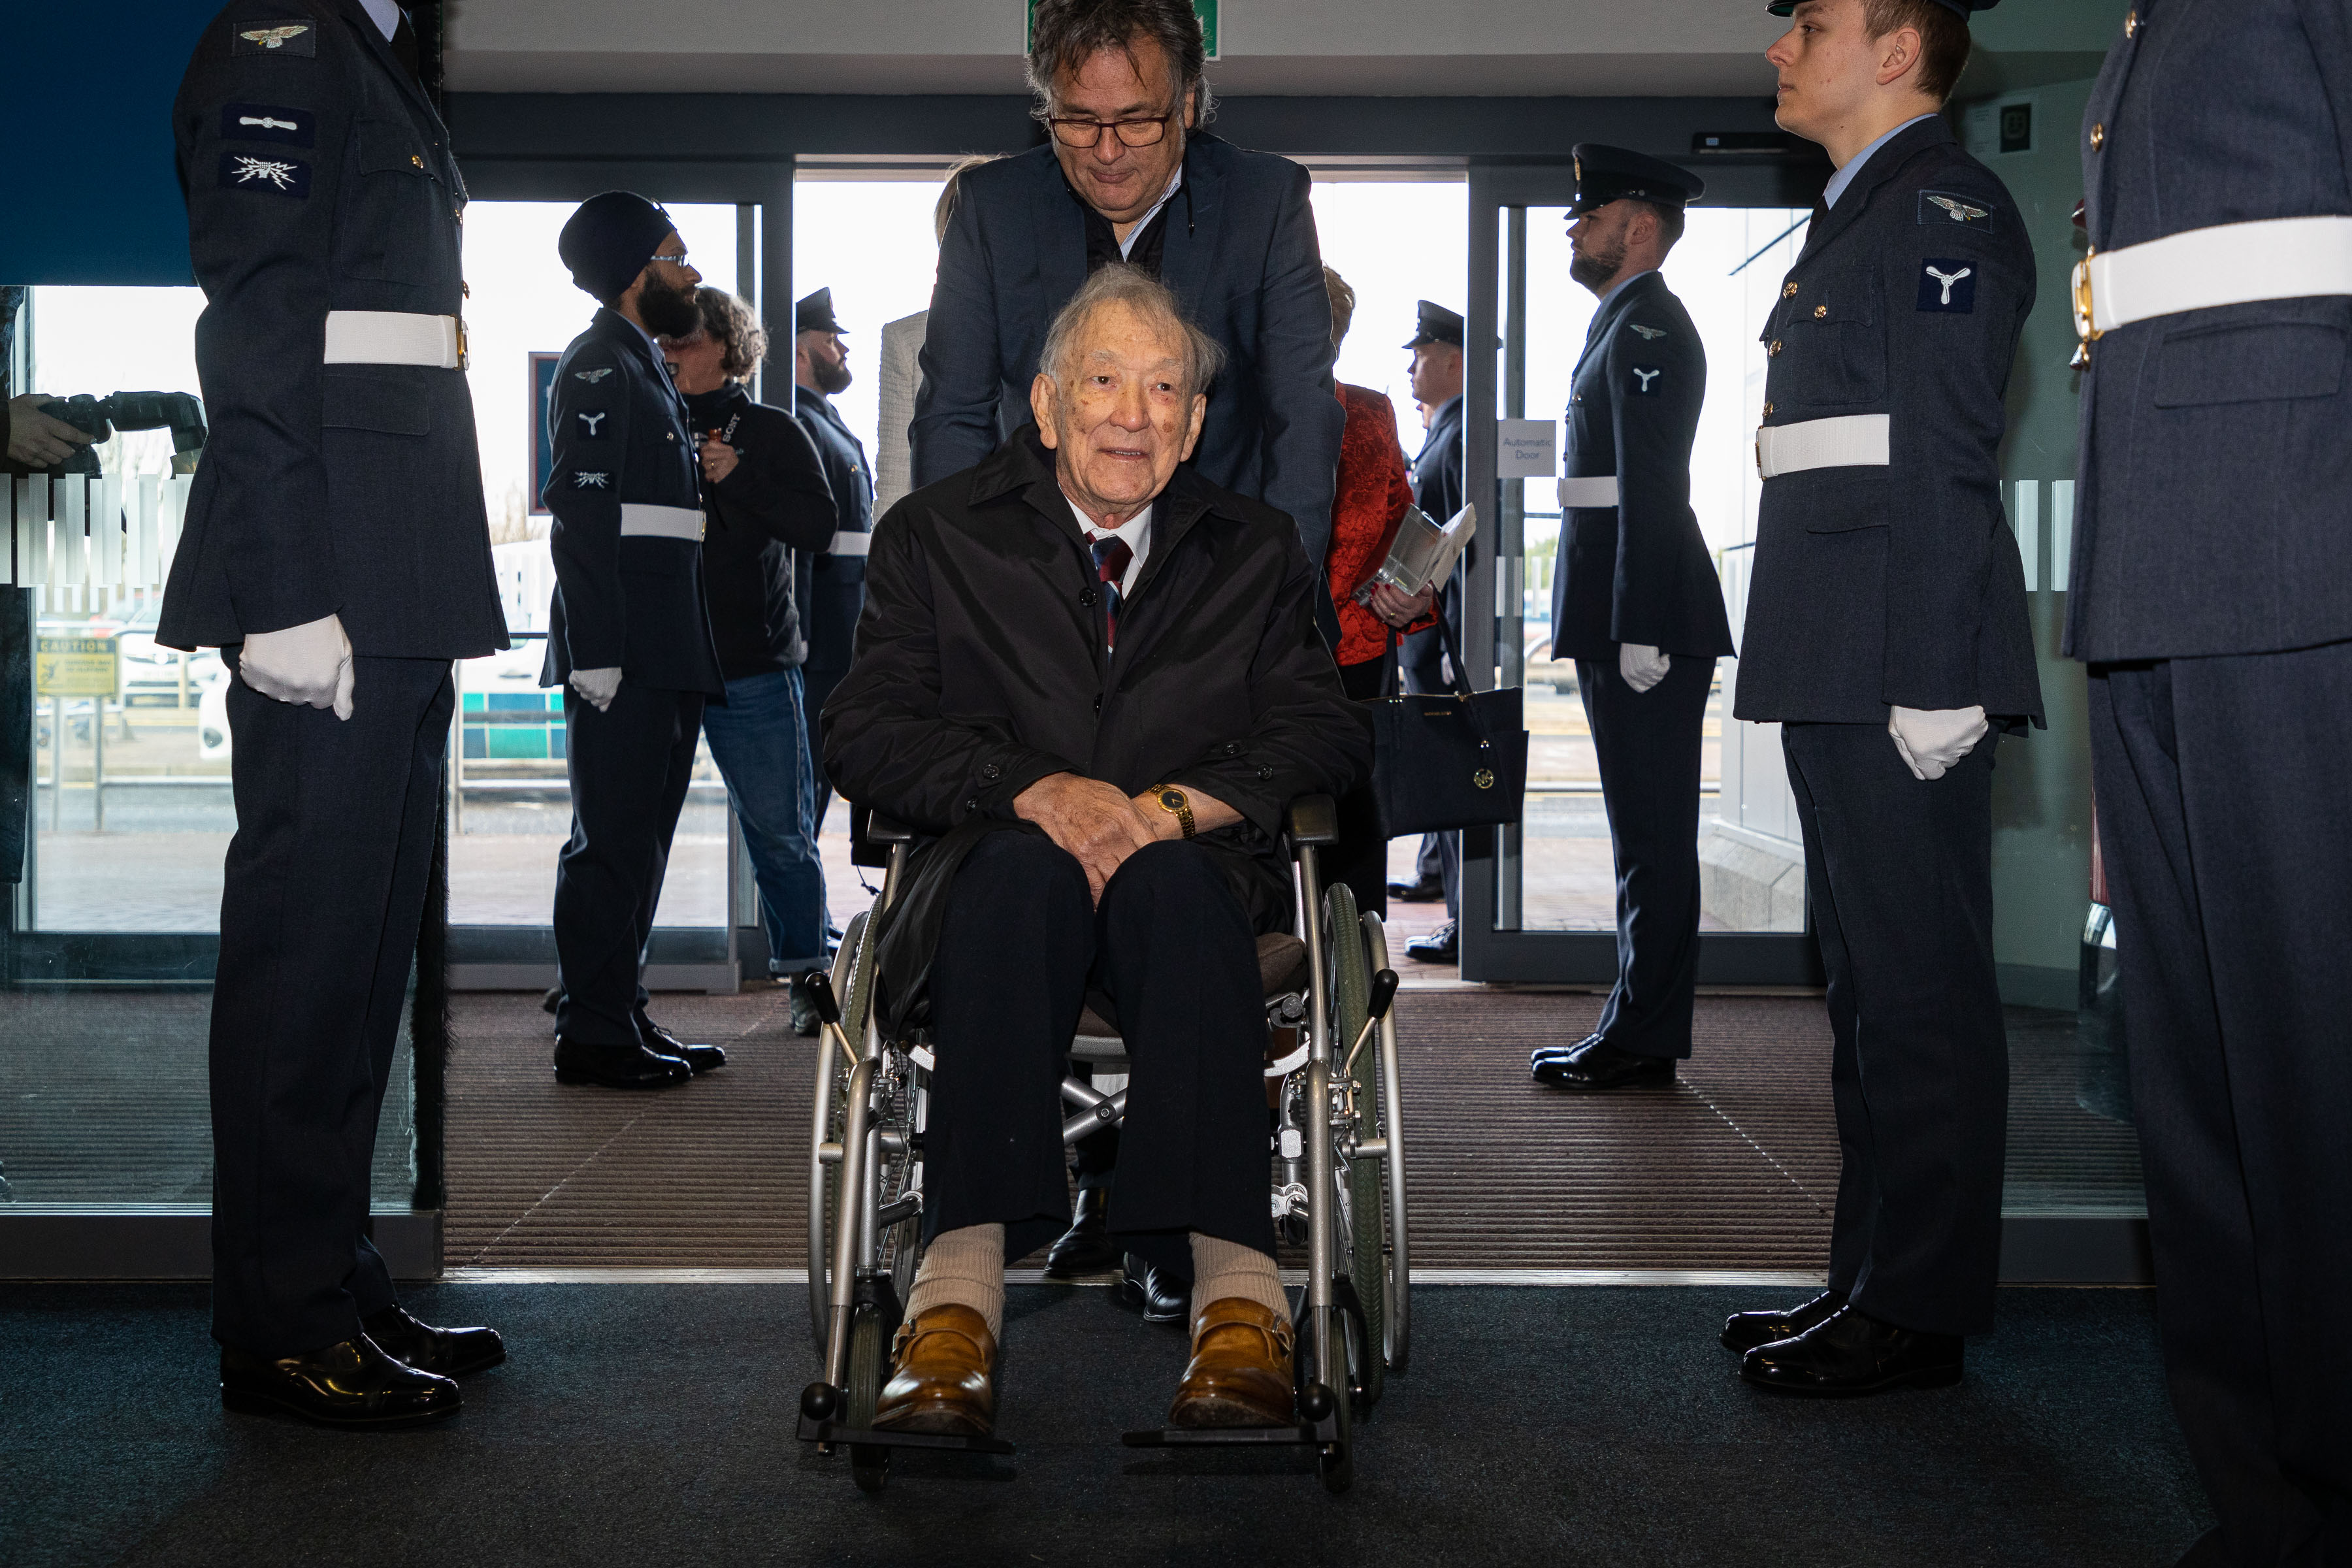 Image shows RAF aviators to attention as veteran is wheeled between them.